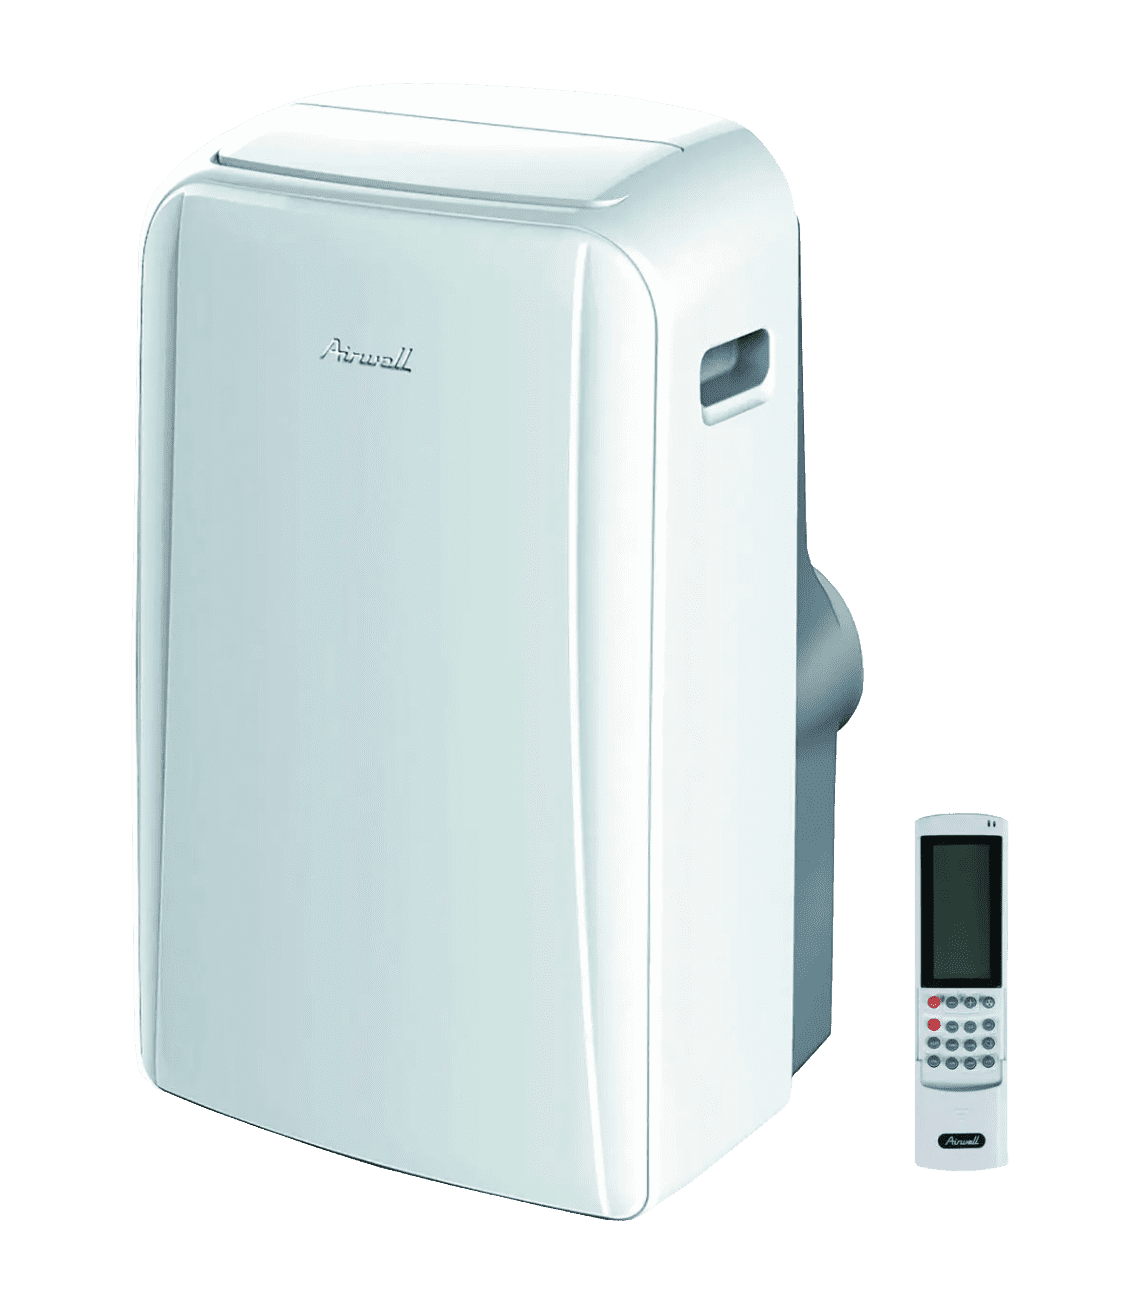 Airwell mobile air conditioning unit